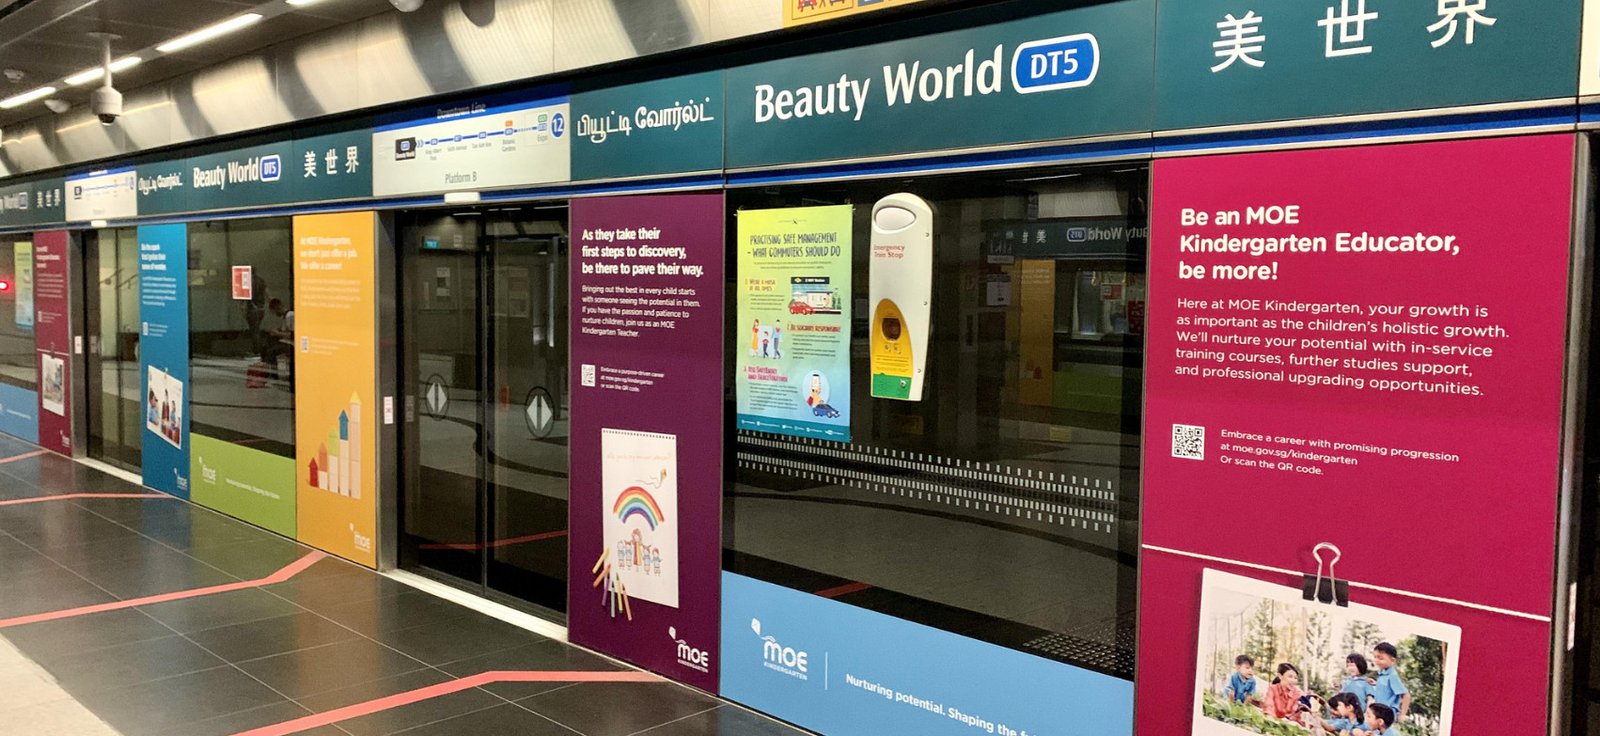 How Beauty World Integrated Transport Hub Will Increase Property Price